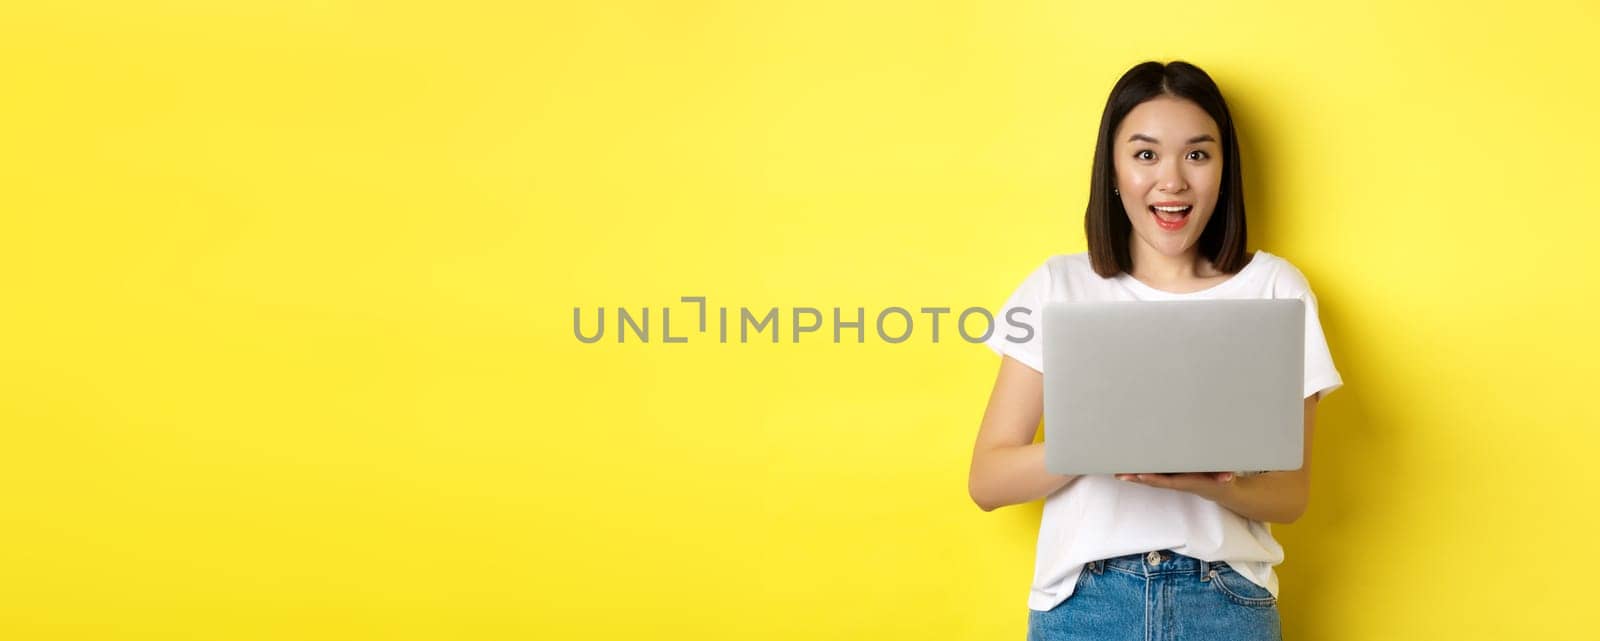 Cheerful asian woman studying on laptop and smiling, standing in white t-shirt and jeans against yellow background.